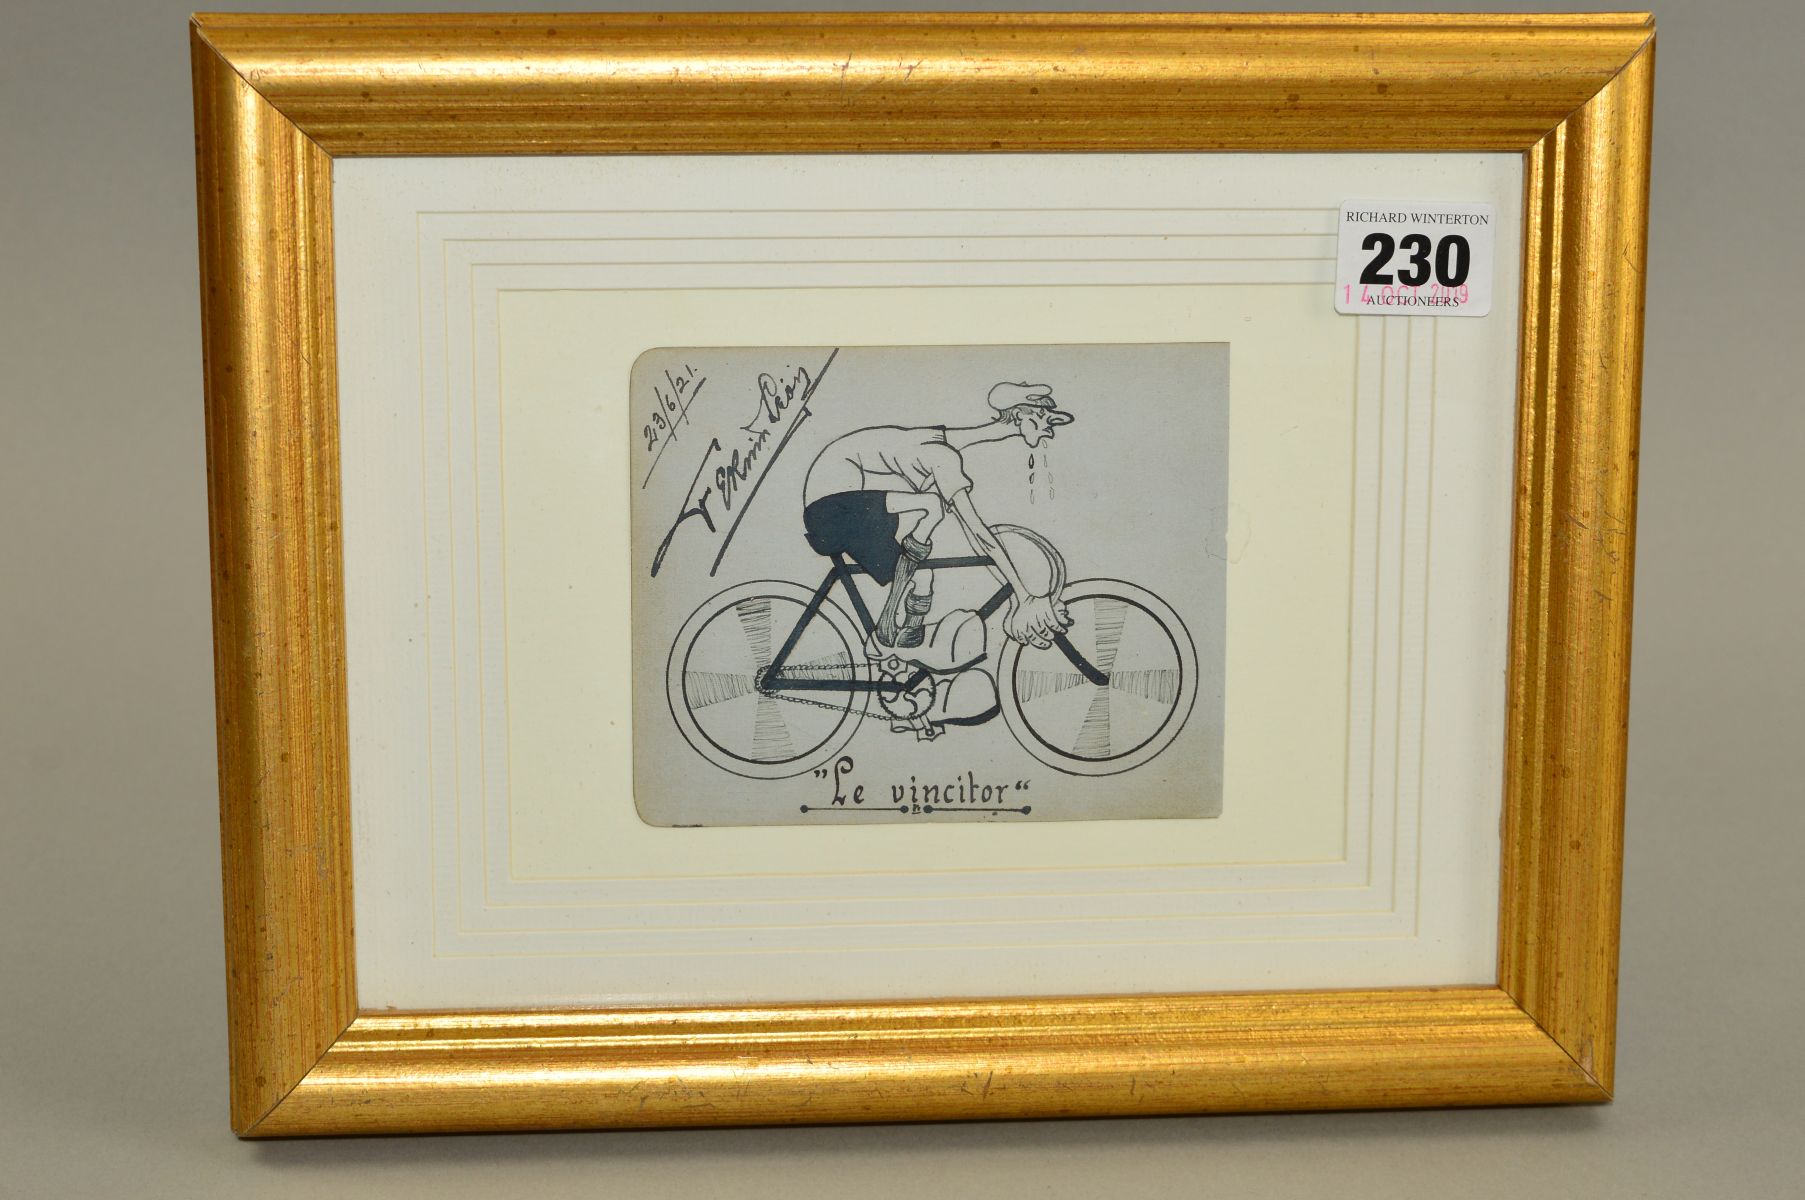 FRAMED AND SIGNED BLACK AND WHITE CARICATURE OF A CYCLIST, with the caption 'Le vincitor', dated